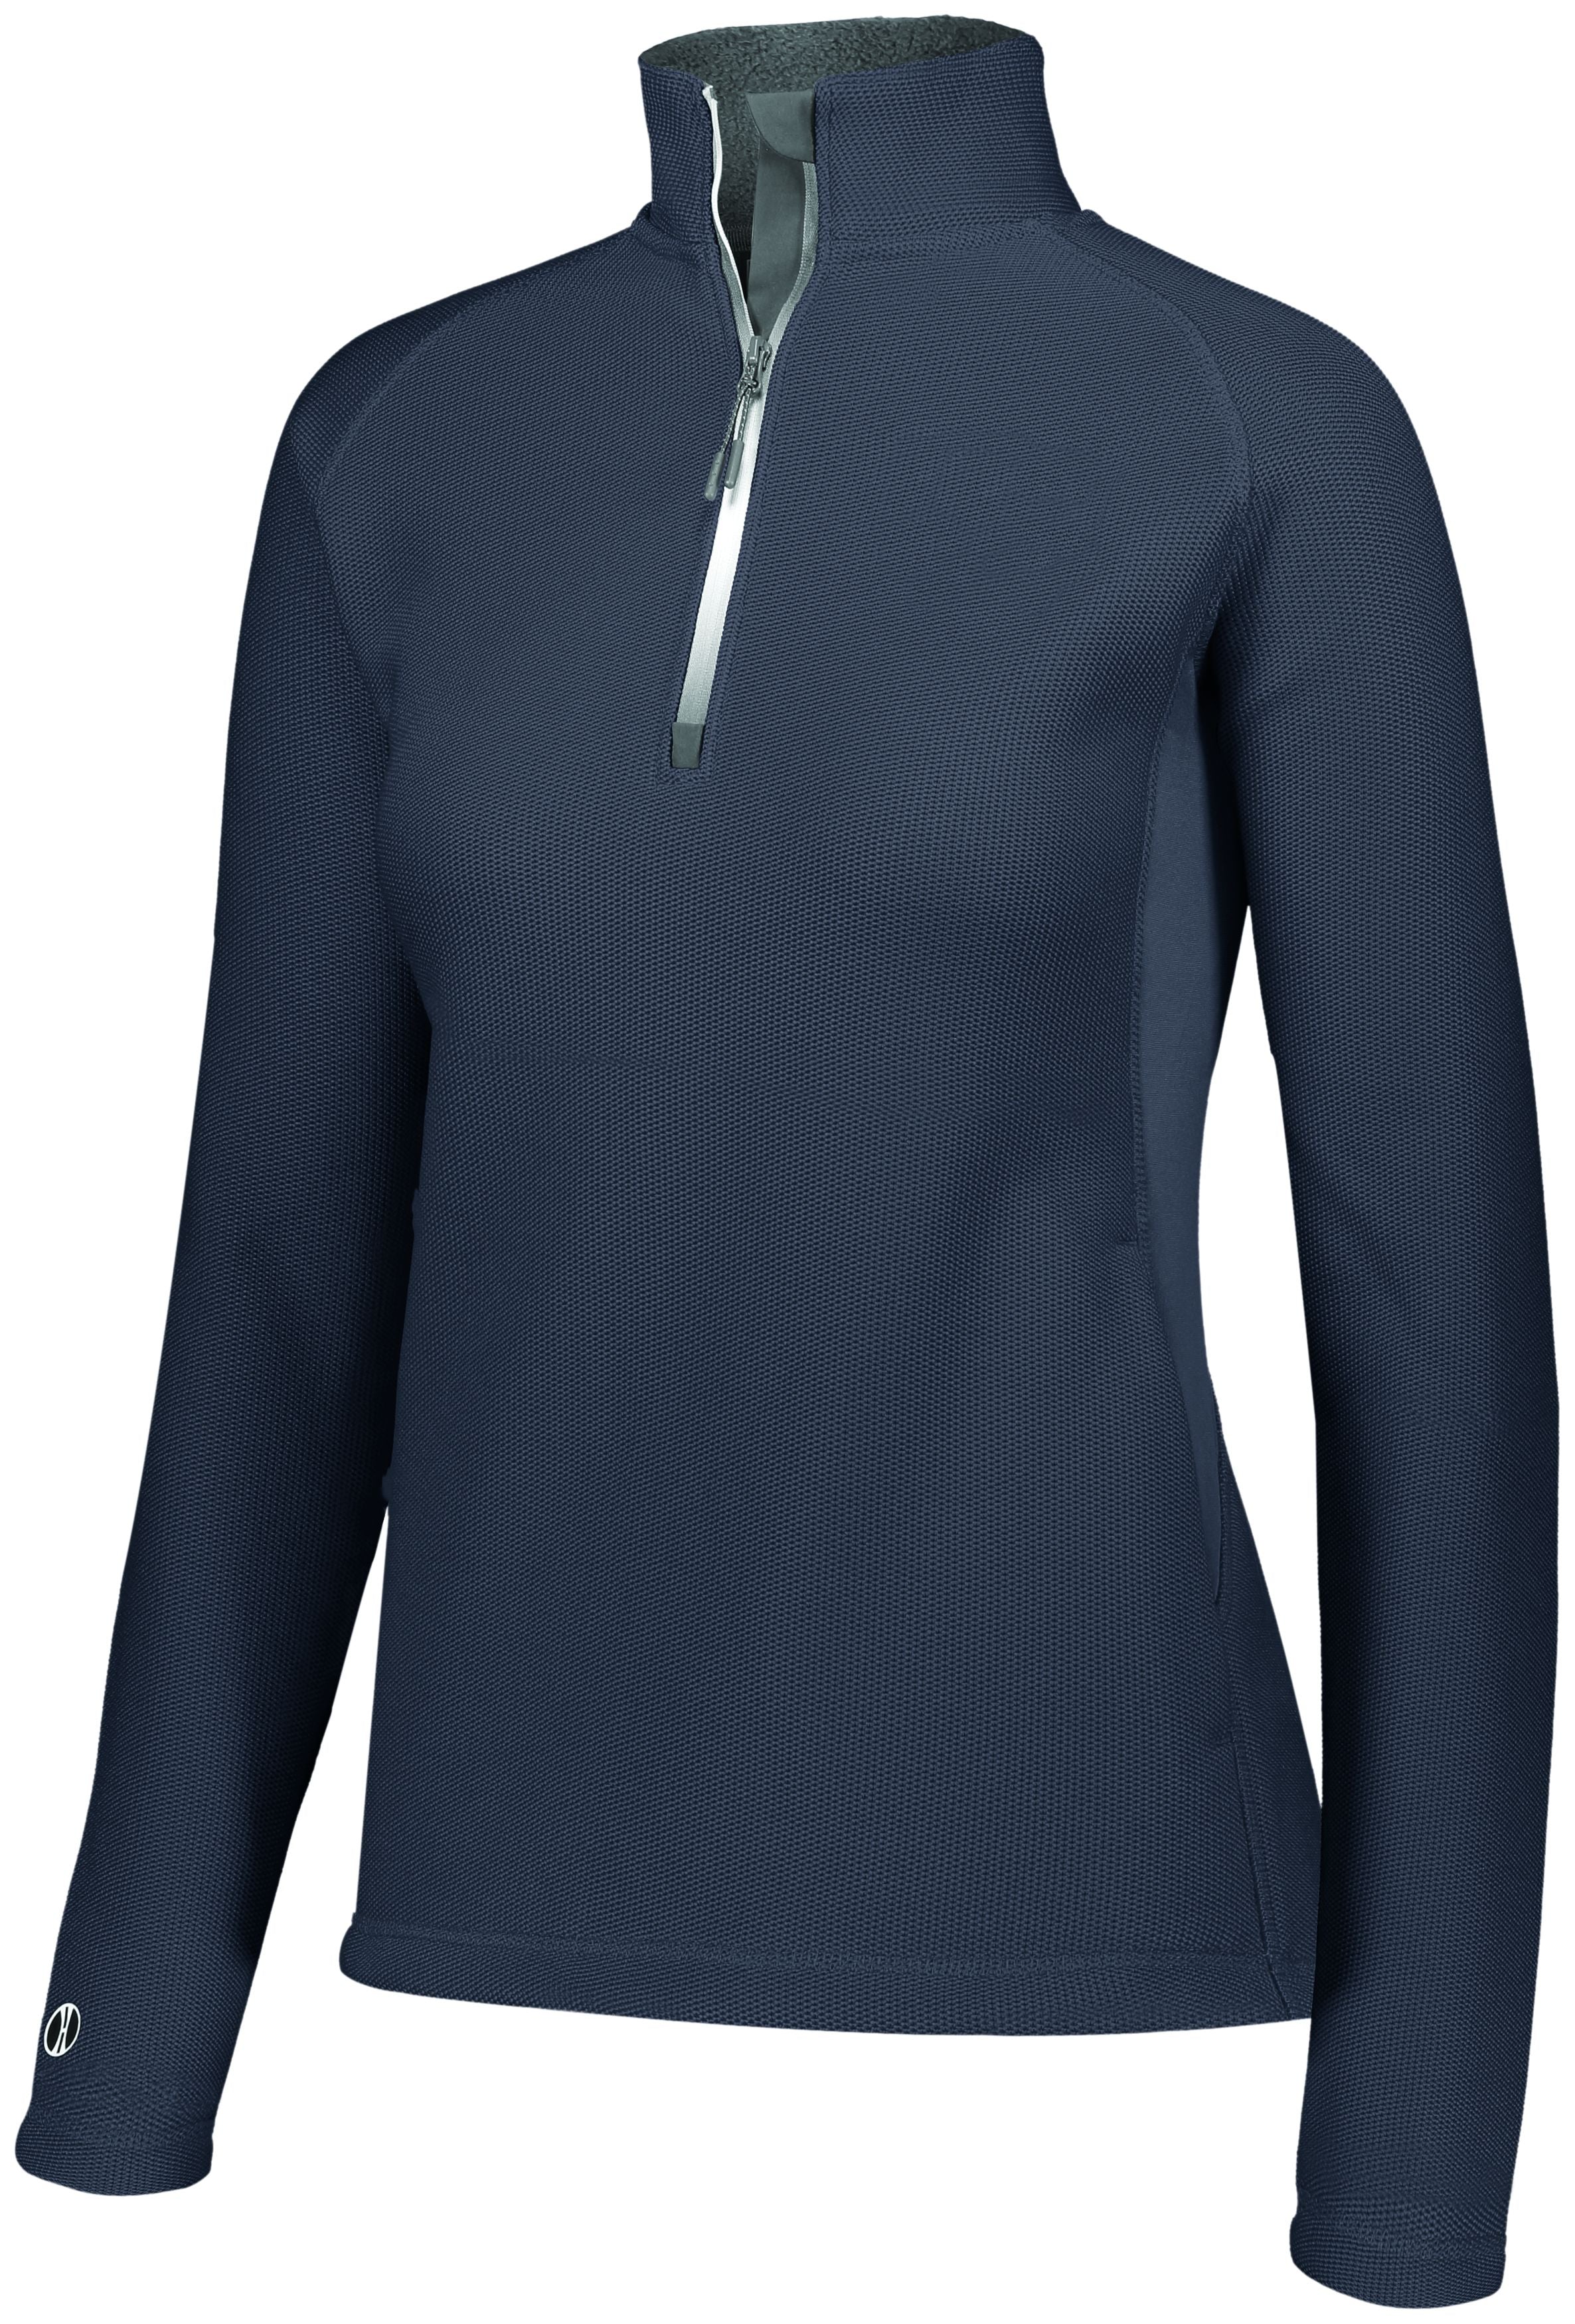 Holloway Ladies Invert 1/2 Zip Pullover in Carbon  -Part of the Ladies, Ladies-Pullover, Holloway, Outerwear, Invert-Collection product lines at KanaleyCreations.com